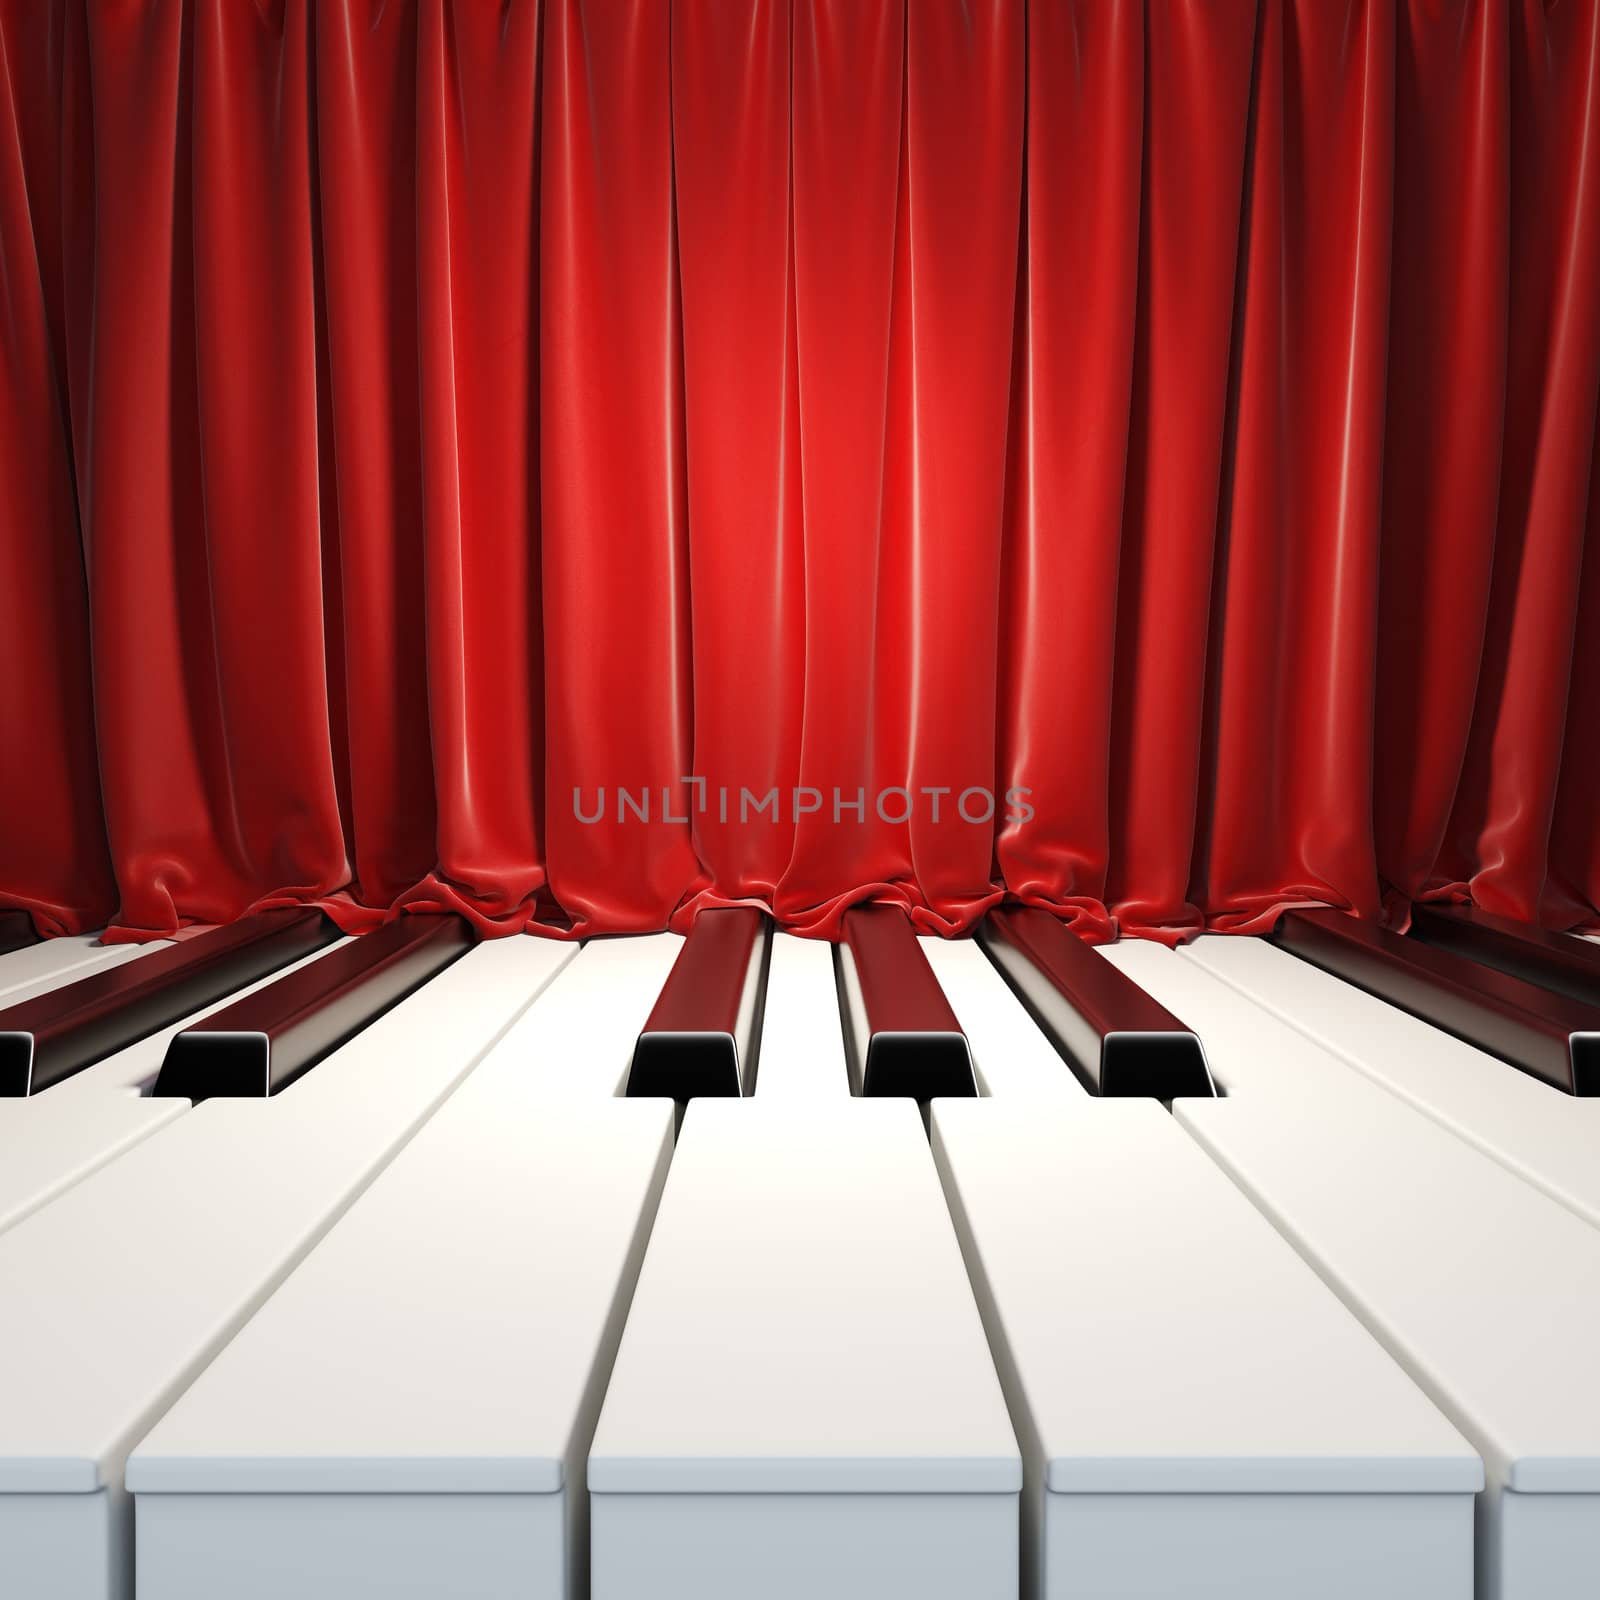 Piano Keys and red curtains. A 3d illustration of blank template layout surface from piano keys and red velvet curtains. Blank template layout of music placard